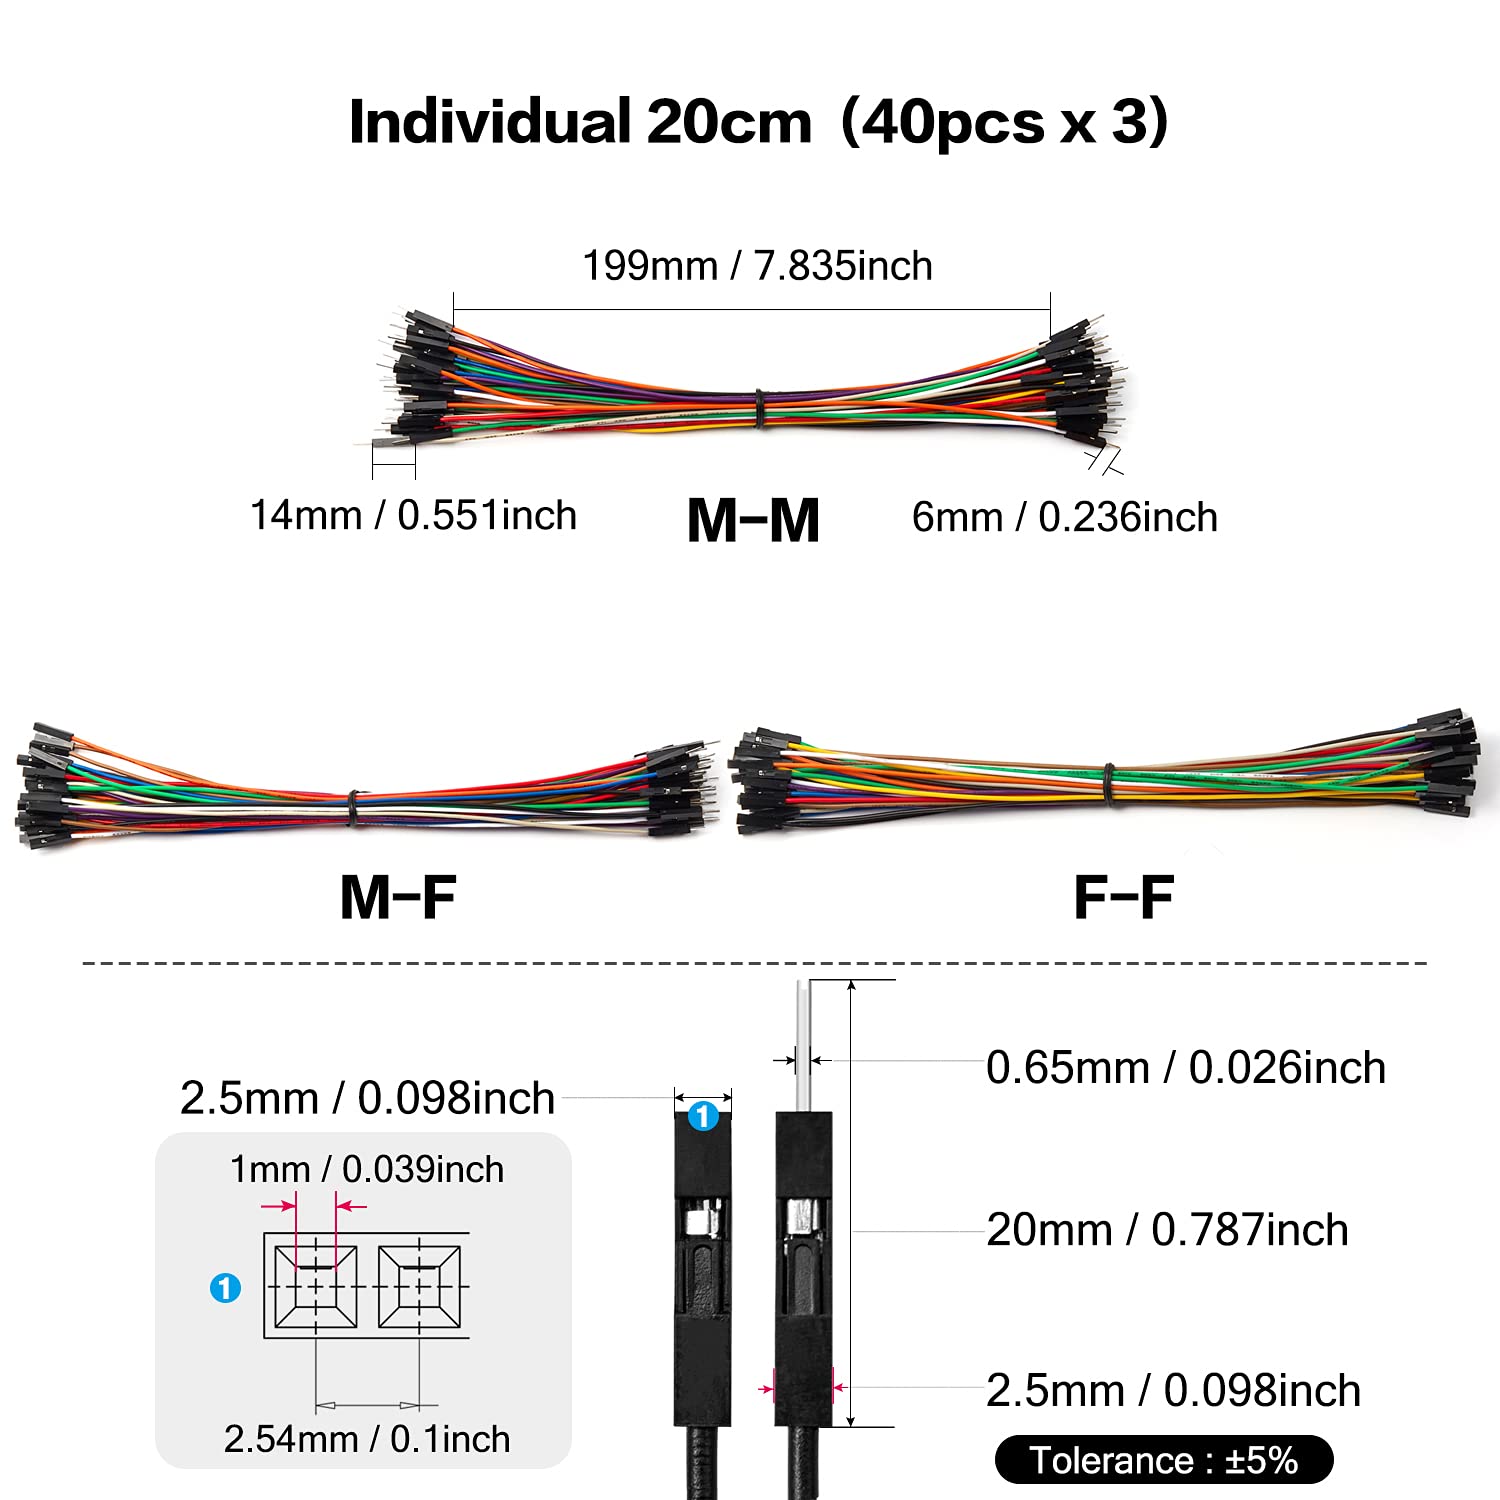 Chanzon 120pcs 10cm 20cm 30cm Long Header Jumper Wire Dupont Cable Line Connector Assorted Kit Set (Male Female M-M M-F F-F) Solderless Multicolor for Arduino Raspberry pi Electronic Breadboard PCB